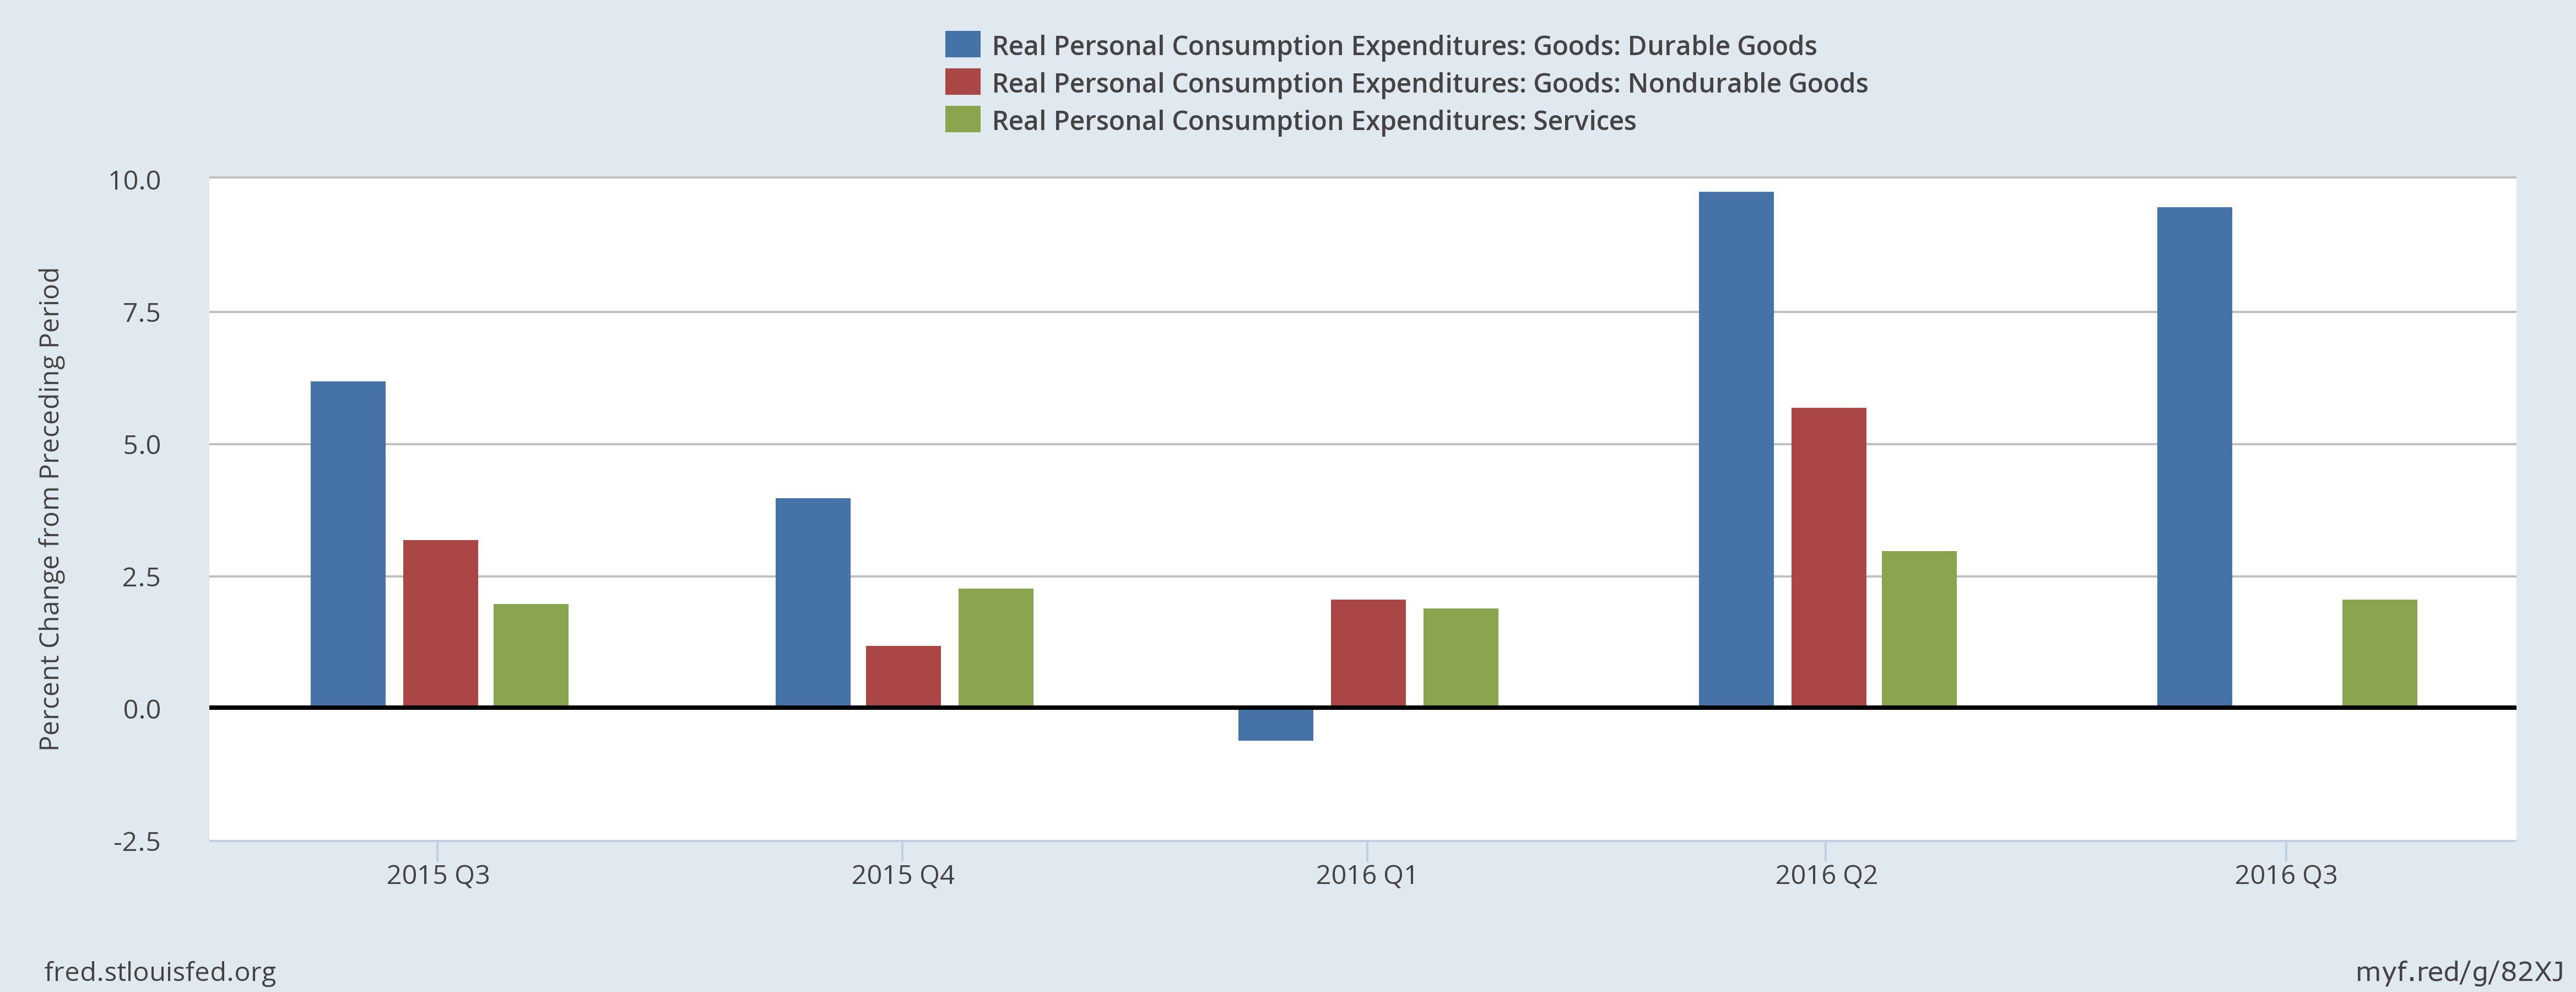 Real Personal Consumption Expenditures 